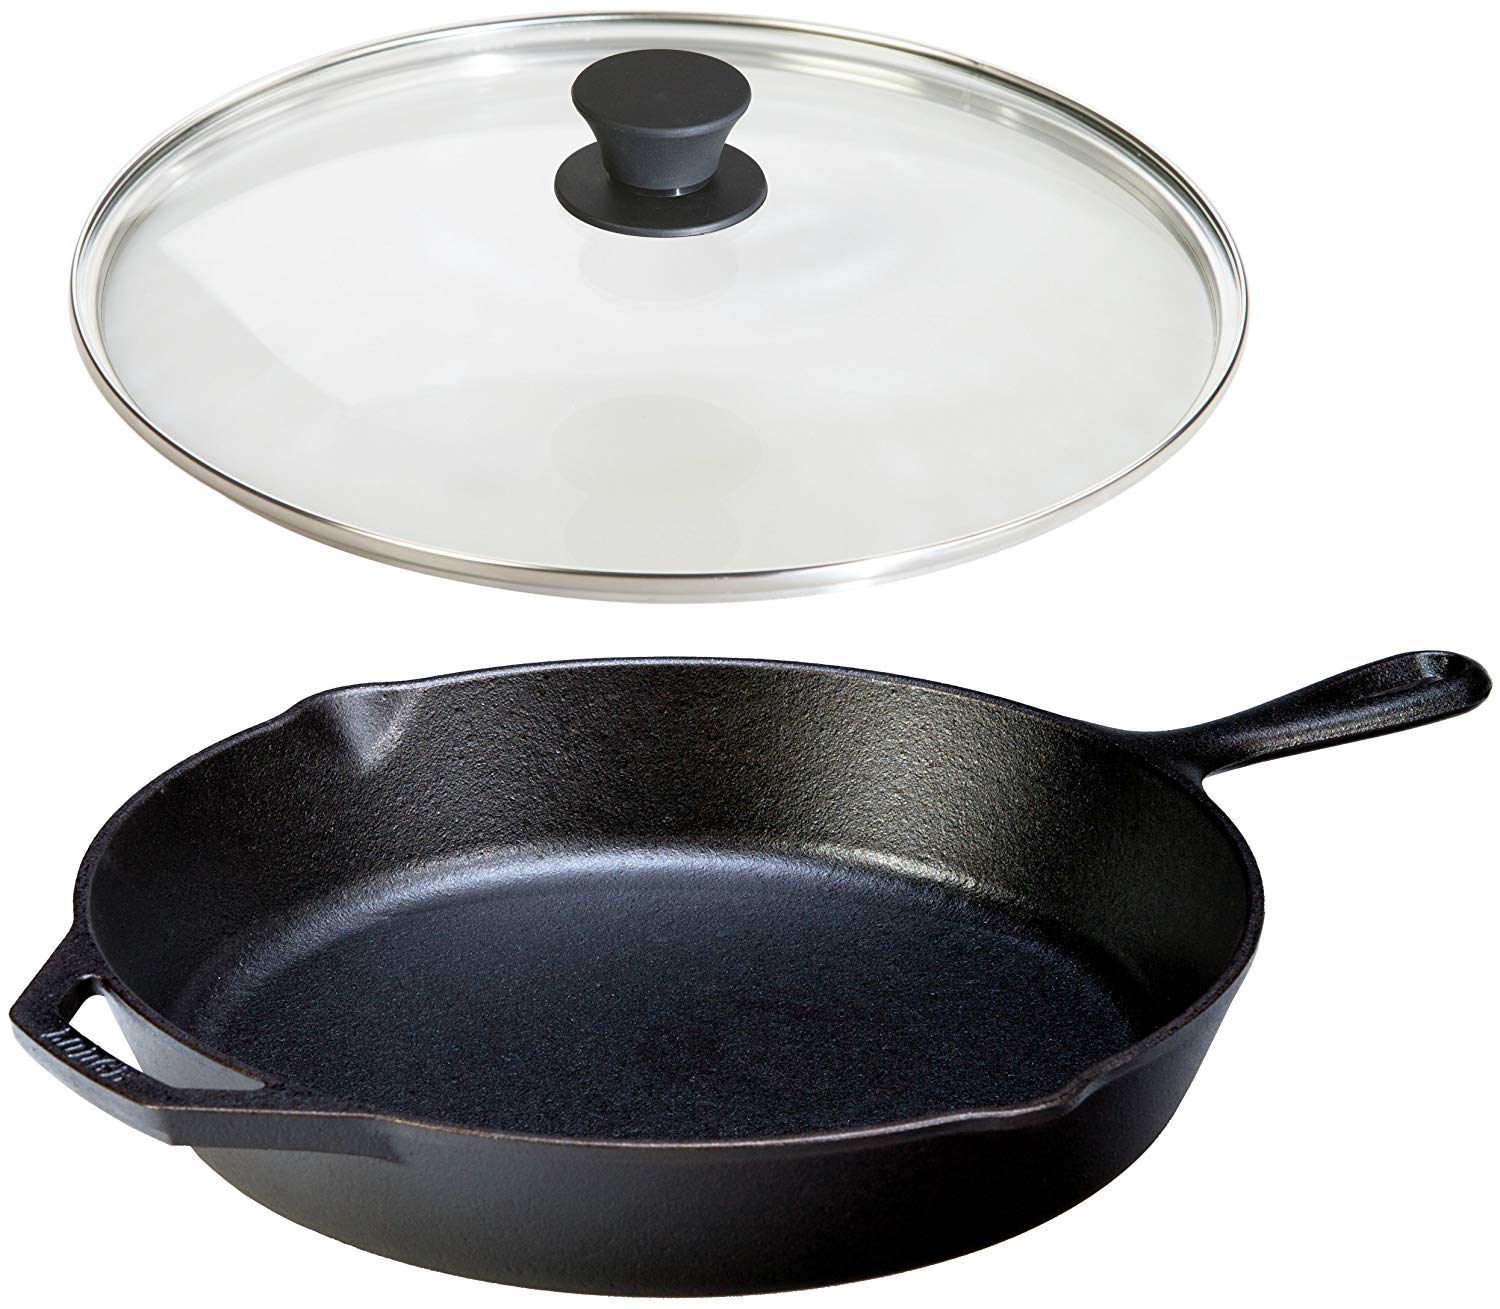 Pre-Seasoned Cast Iron Skillet (12-Inch) with Glass Lid and Handle Cover  Oven Safe Cookware 